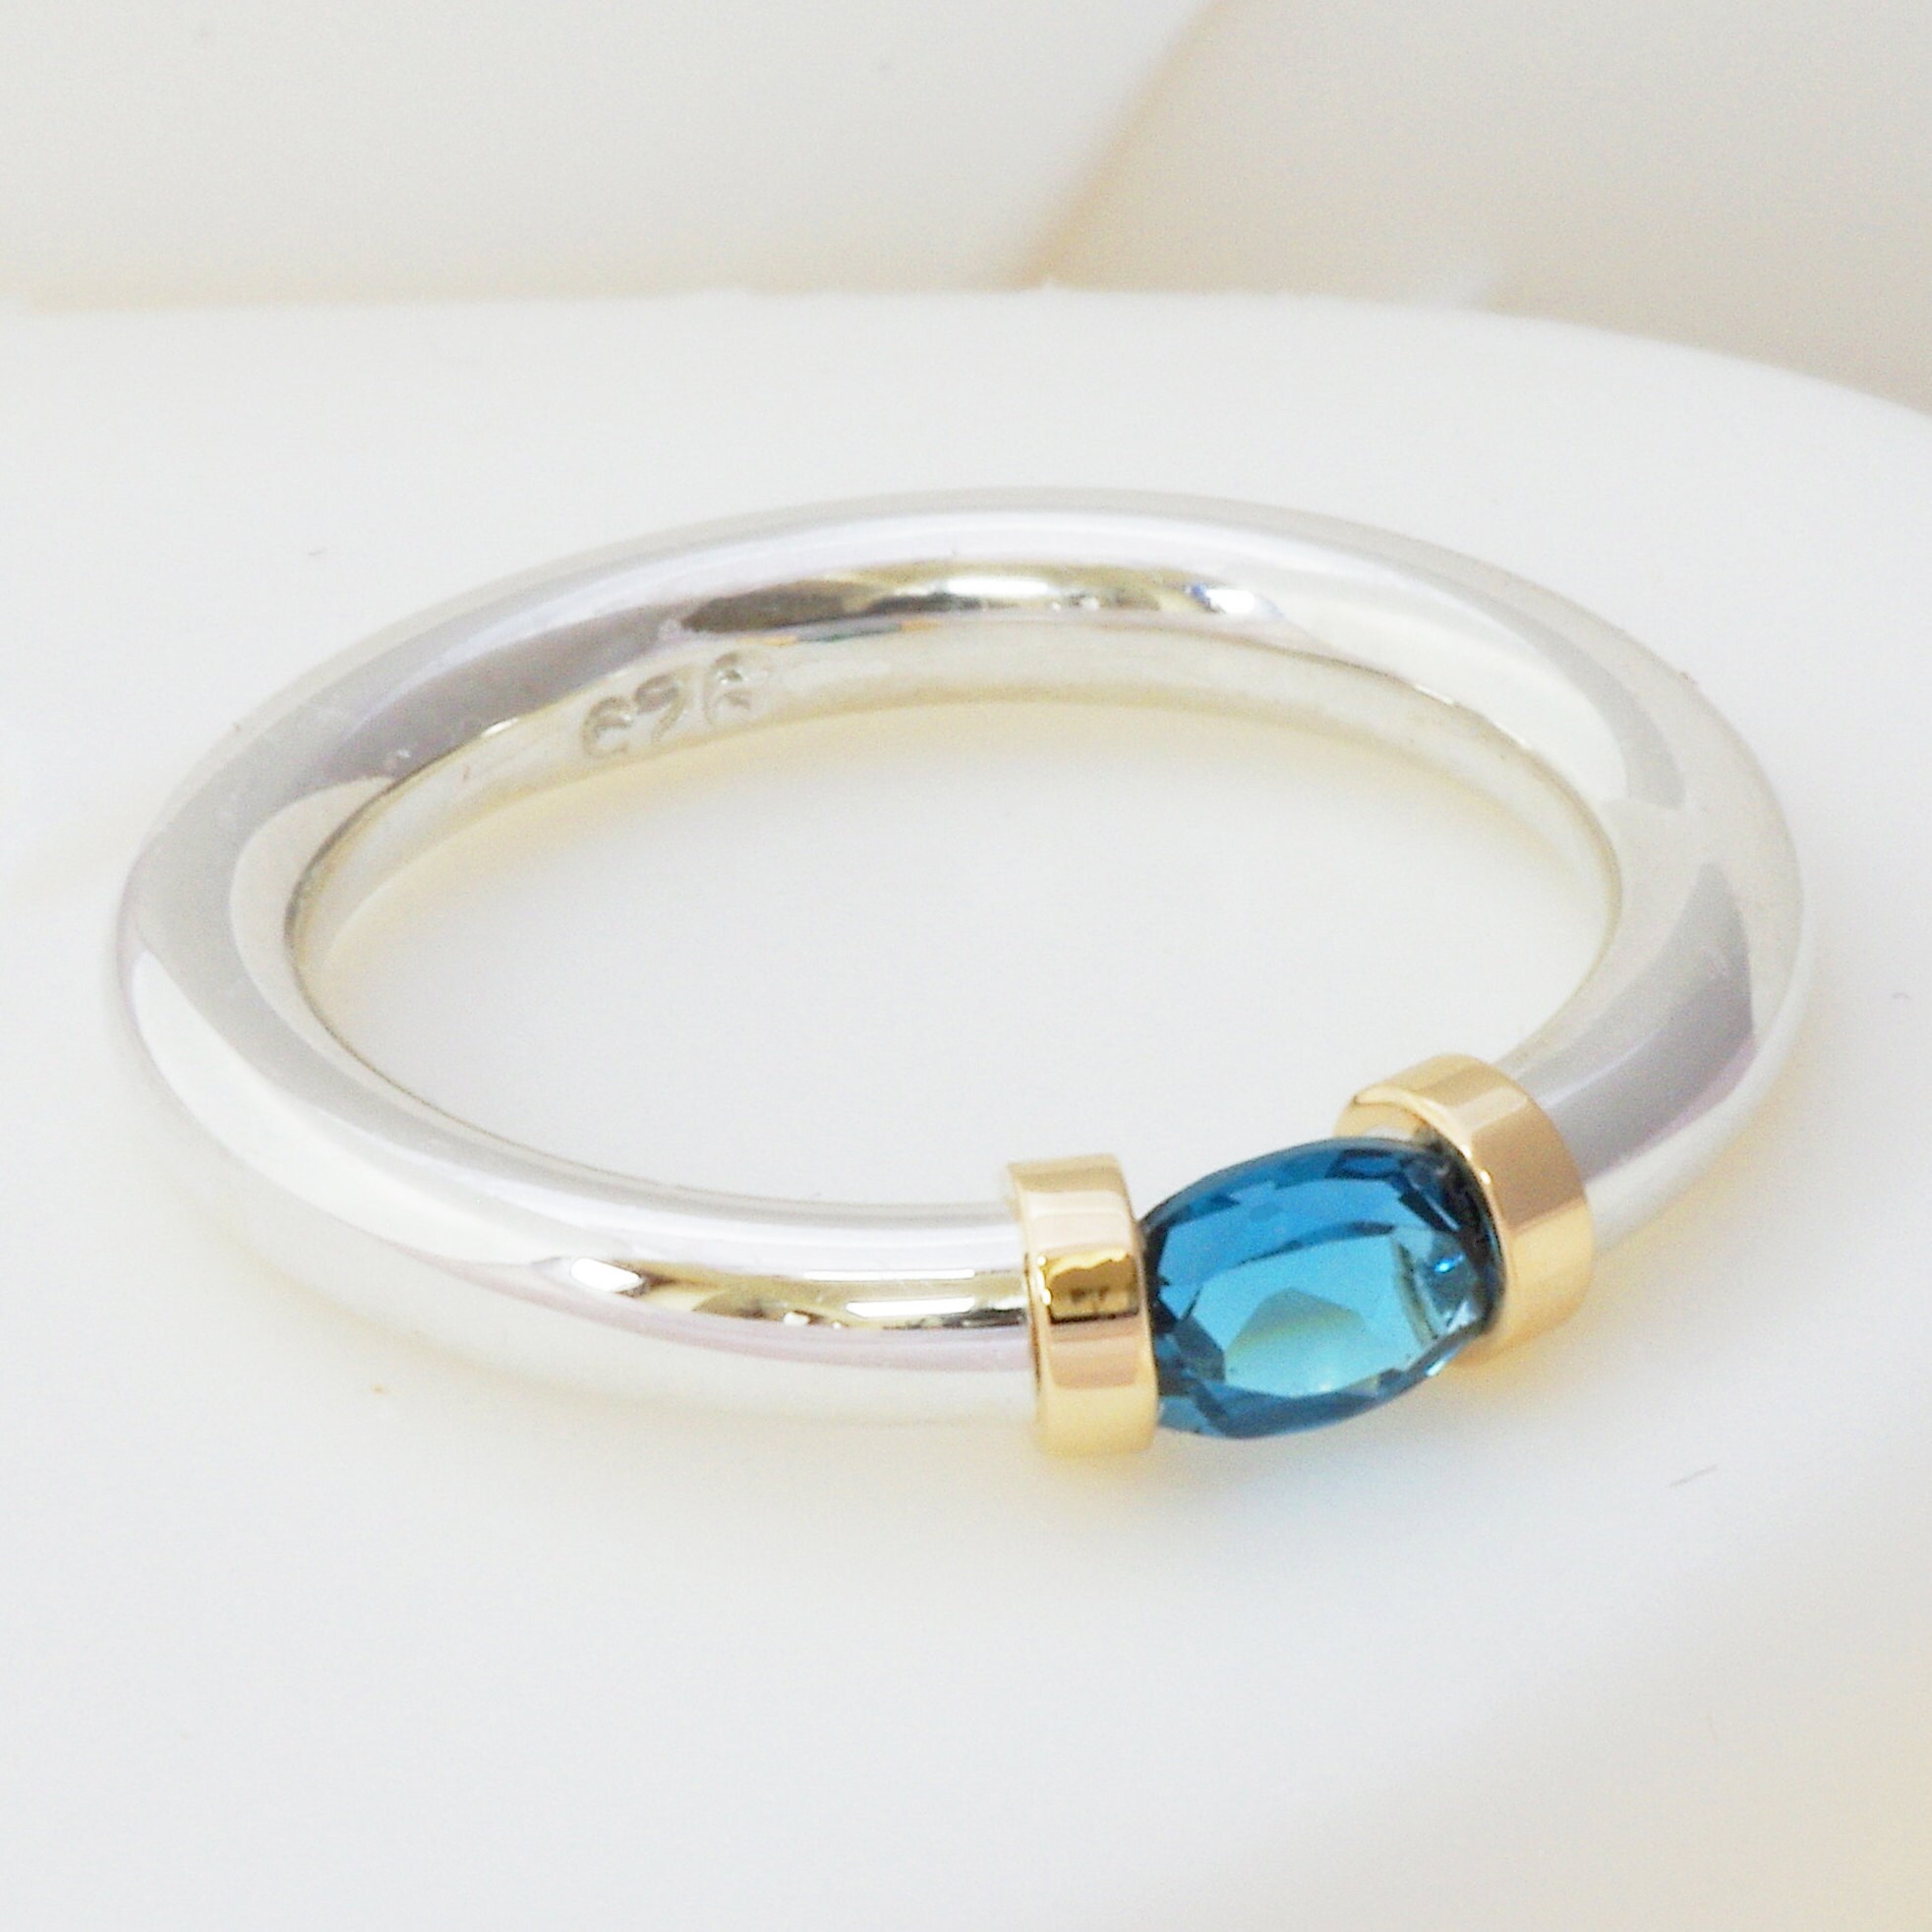 Blue Topaz Tension Ring in Silver With Gold. - Etsy UK